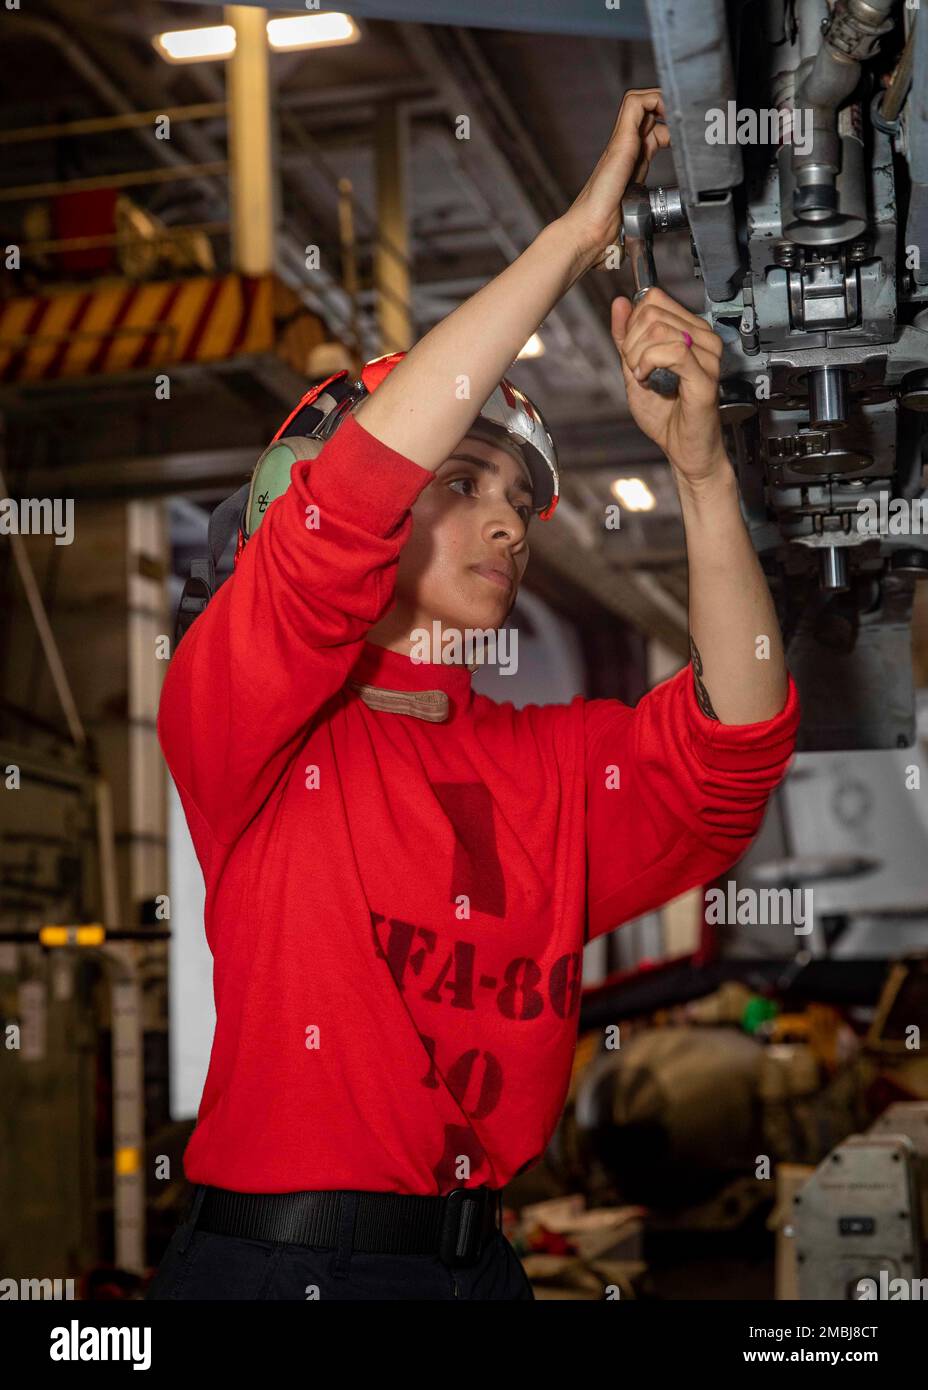 220616-N-OL632-1007 ATLANTIC OCEAN (June 16, 2022) Aviation Ordnanceman 3rd Class Jesika Celis, assigned to Strike Fight Squadron (VFA) 86, tightens bolts on an F/A-18E Super Hornet aircraft aboard the Nimitz-class aircraft carrier USS George H.W. Bush (CVN 77), June 16, 2022. The George H.W. Bush Carrier Strike Group (CSG) is underway completing a certification exercise to increase U.S. and allied interoperability and warfighting capability before a future deployment. The George H.W. Bush CSG is an integrated combat weapons system that delivers superior combat capability to deter, and if nece Stock Photo